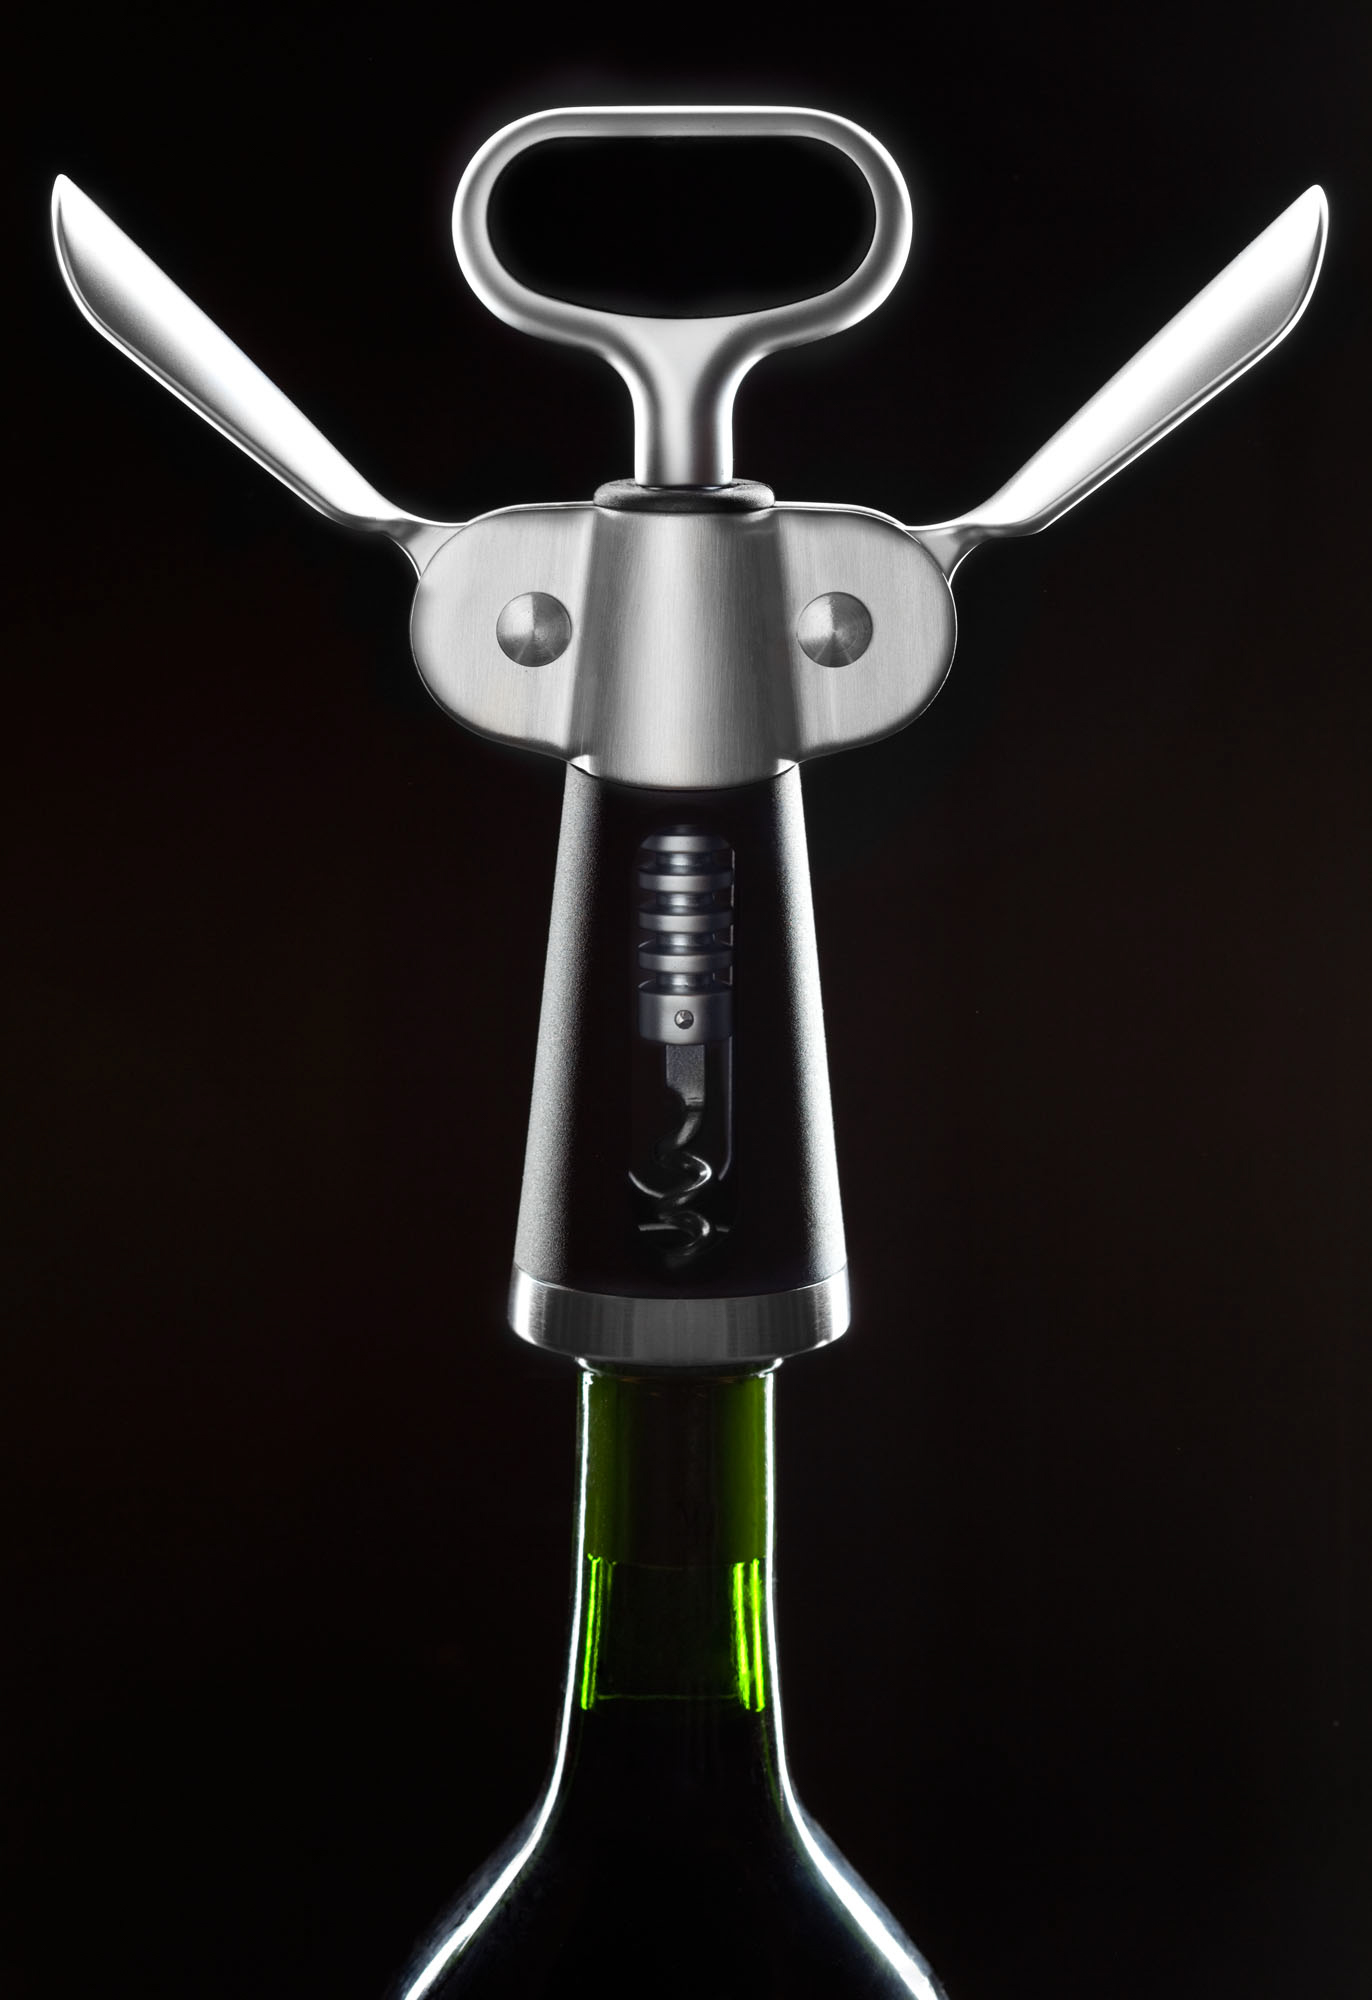 wine bottle opener on black, product photography with dramatic lighting | Still Life Photography  | Shot in Denver, Colorado